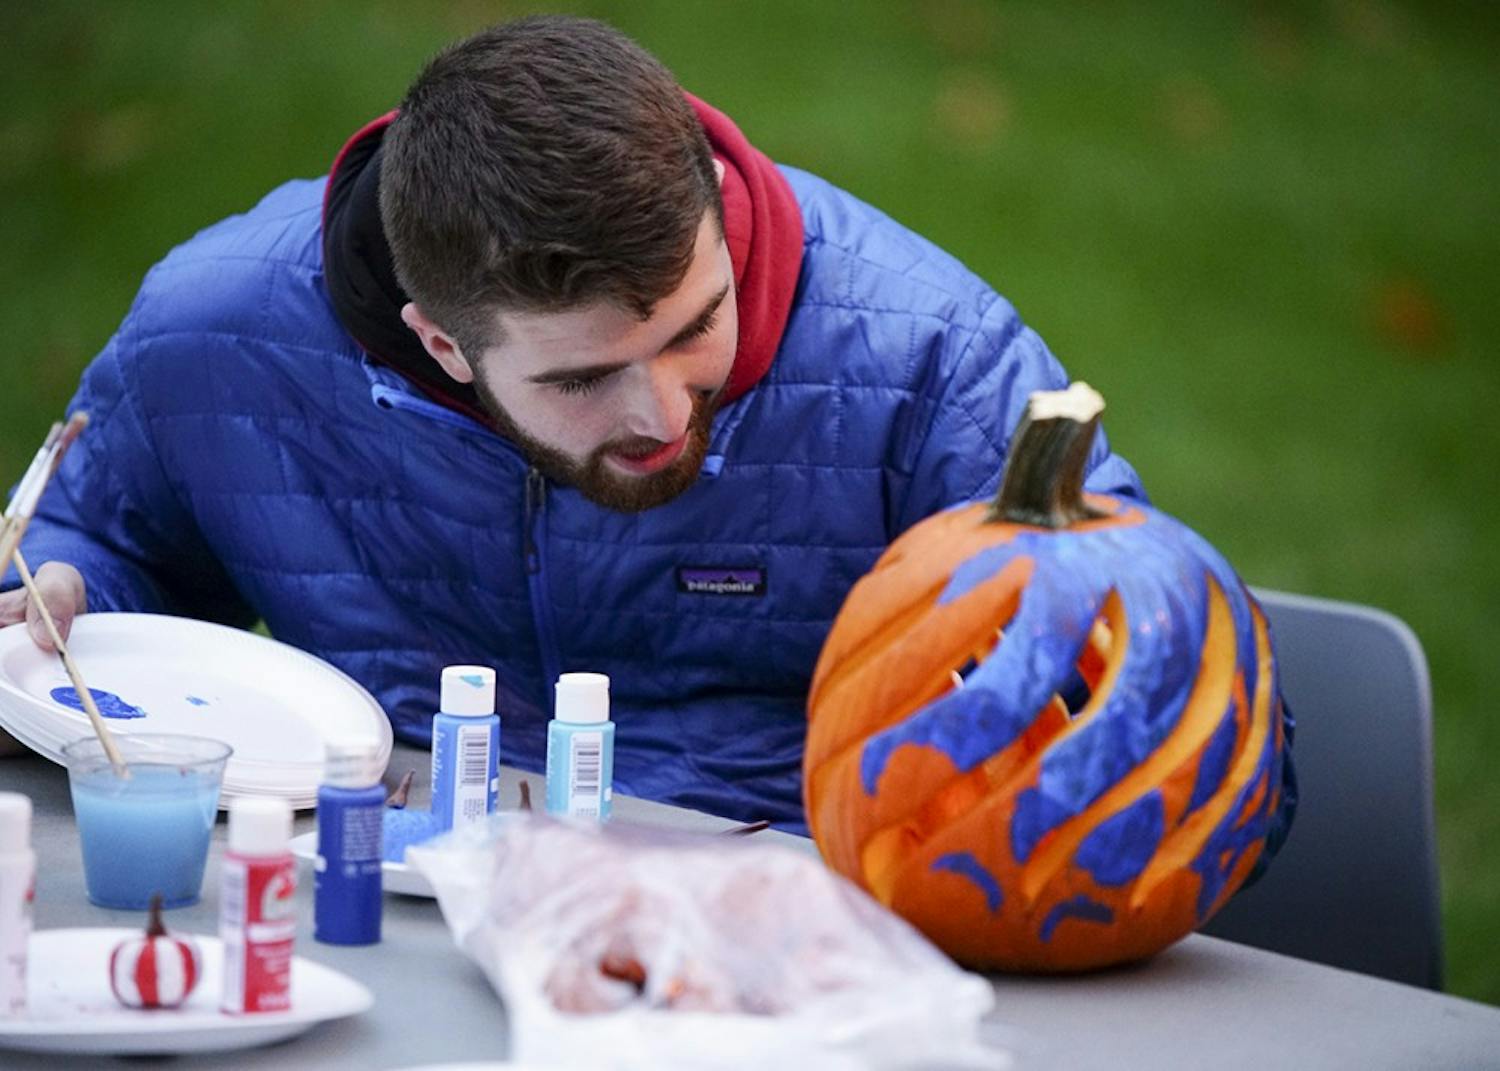 Freshman Tanner Graves decorates pumpkins while chatting with friends during Central’s Creepy Carnival Saturday evening outside of Teter Quadrangle. The event featured laser tag, free food catered by Residential Programs and Services Dining and an outdoor movie screening of the 1984 film Ghostbusters.